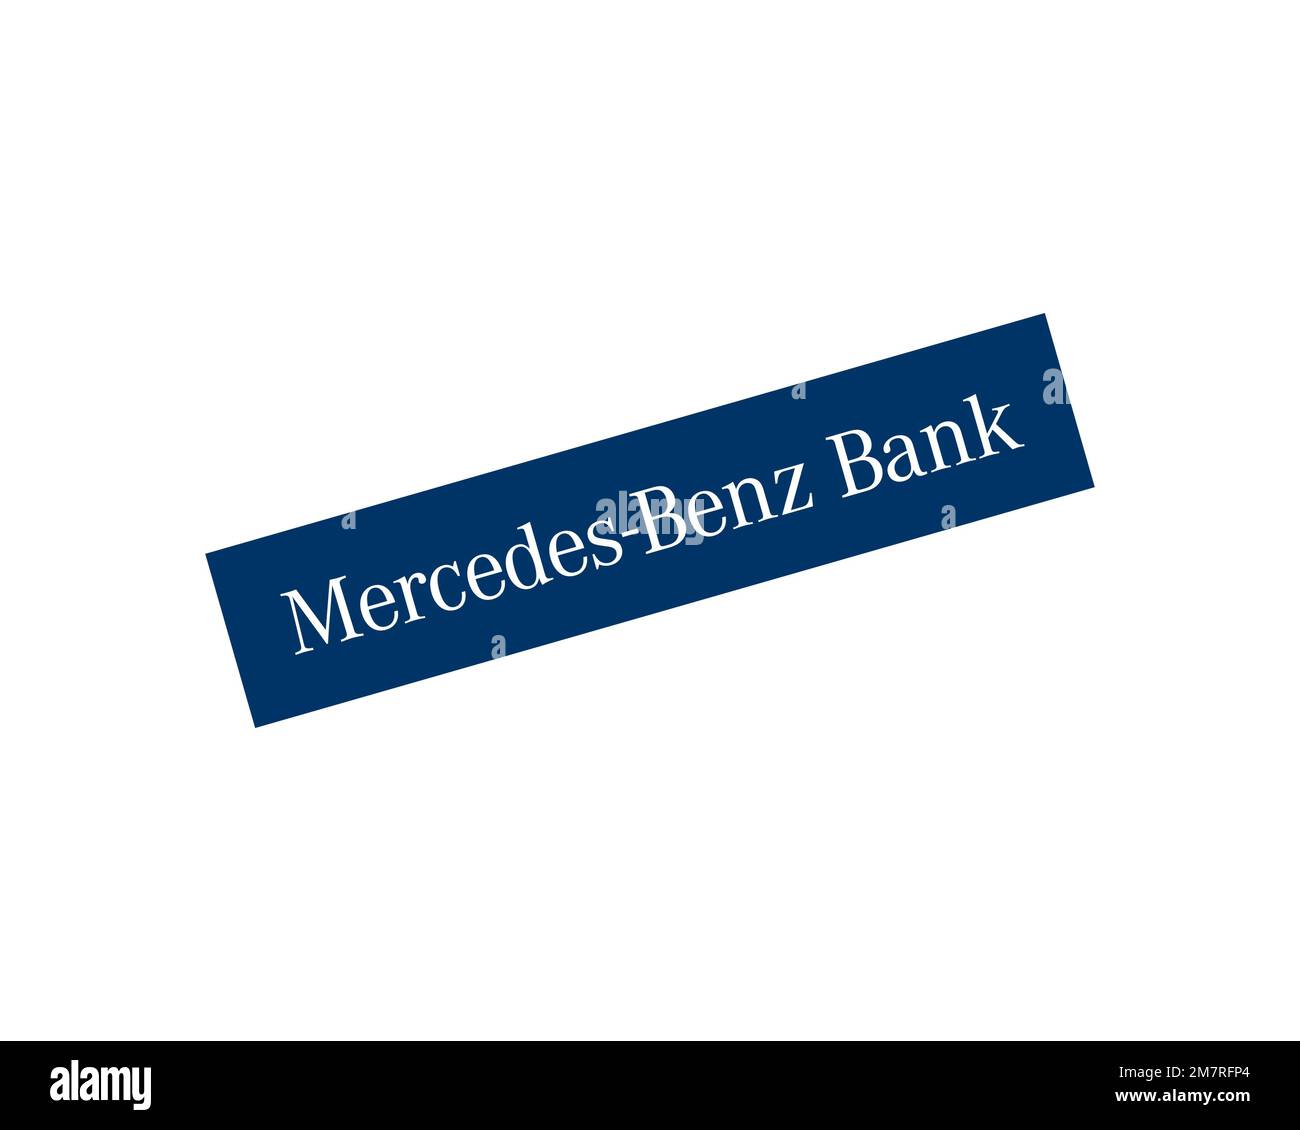 Mercedes benz logo Cut Out Stock Images & Pictures - Alamy